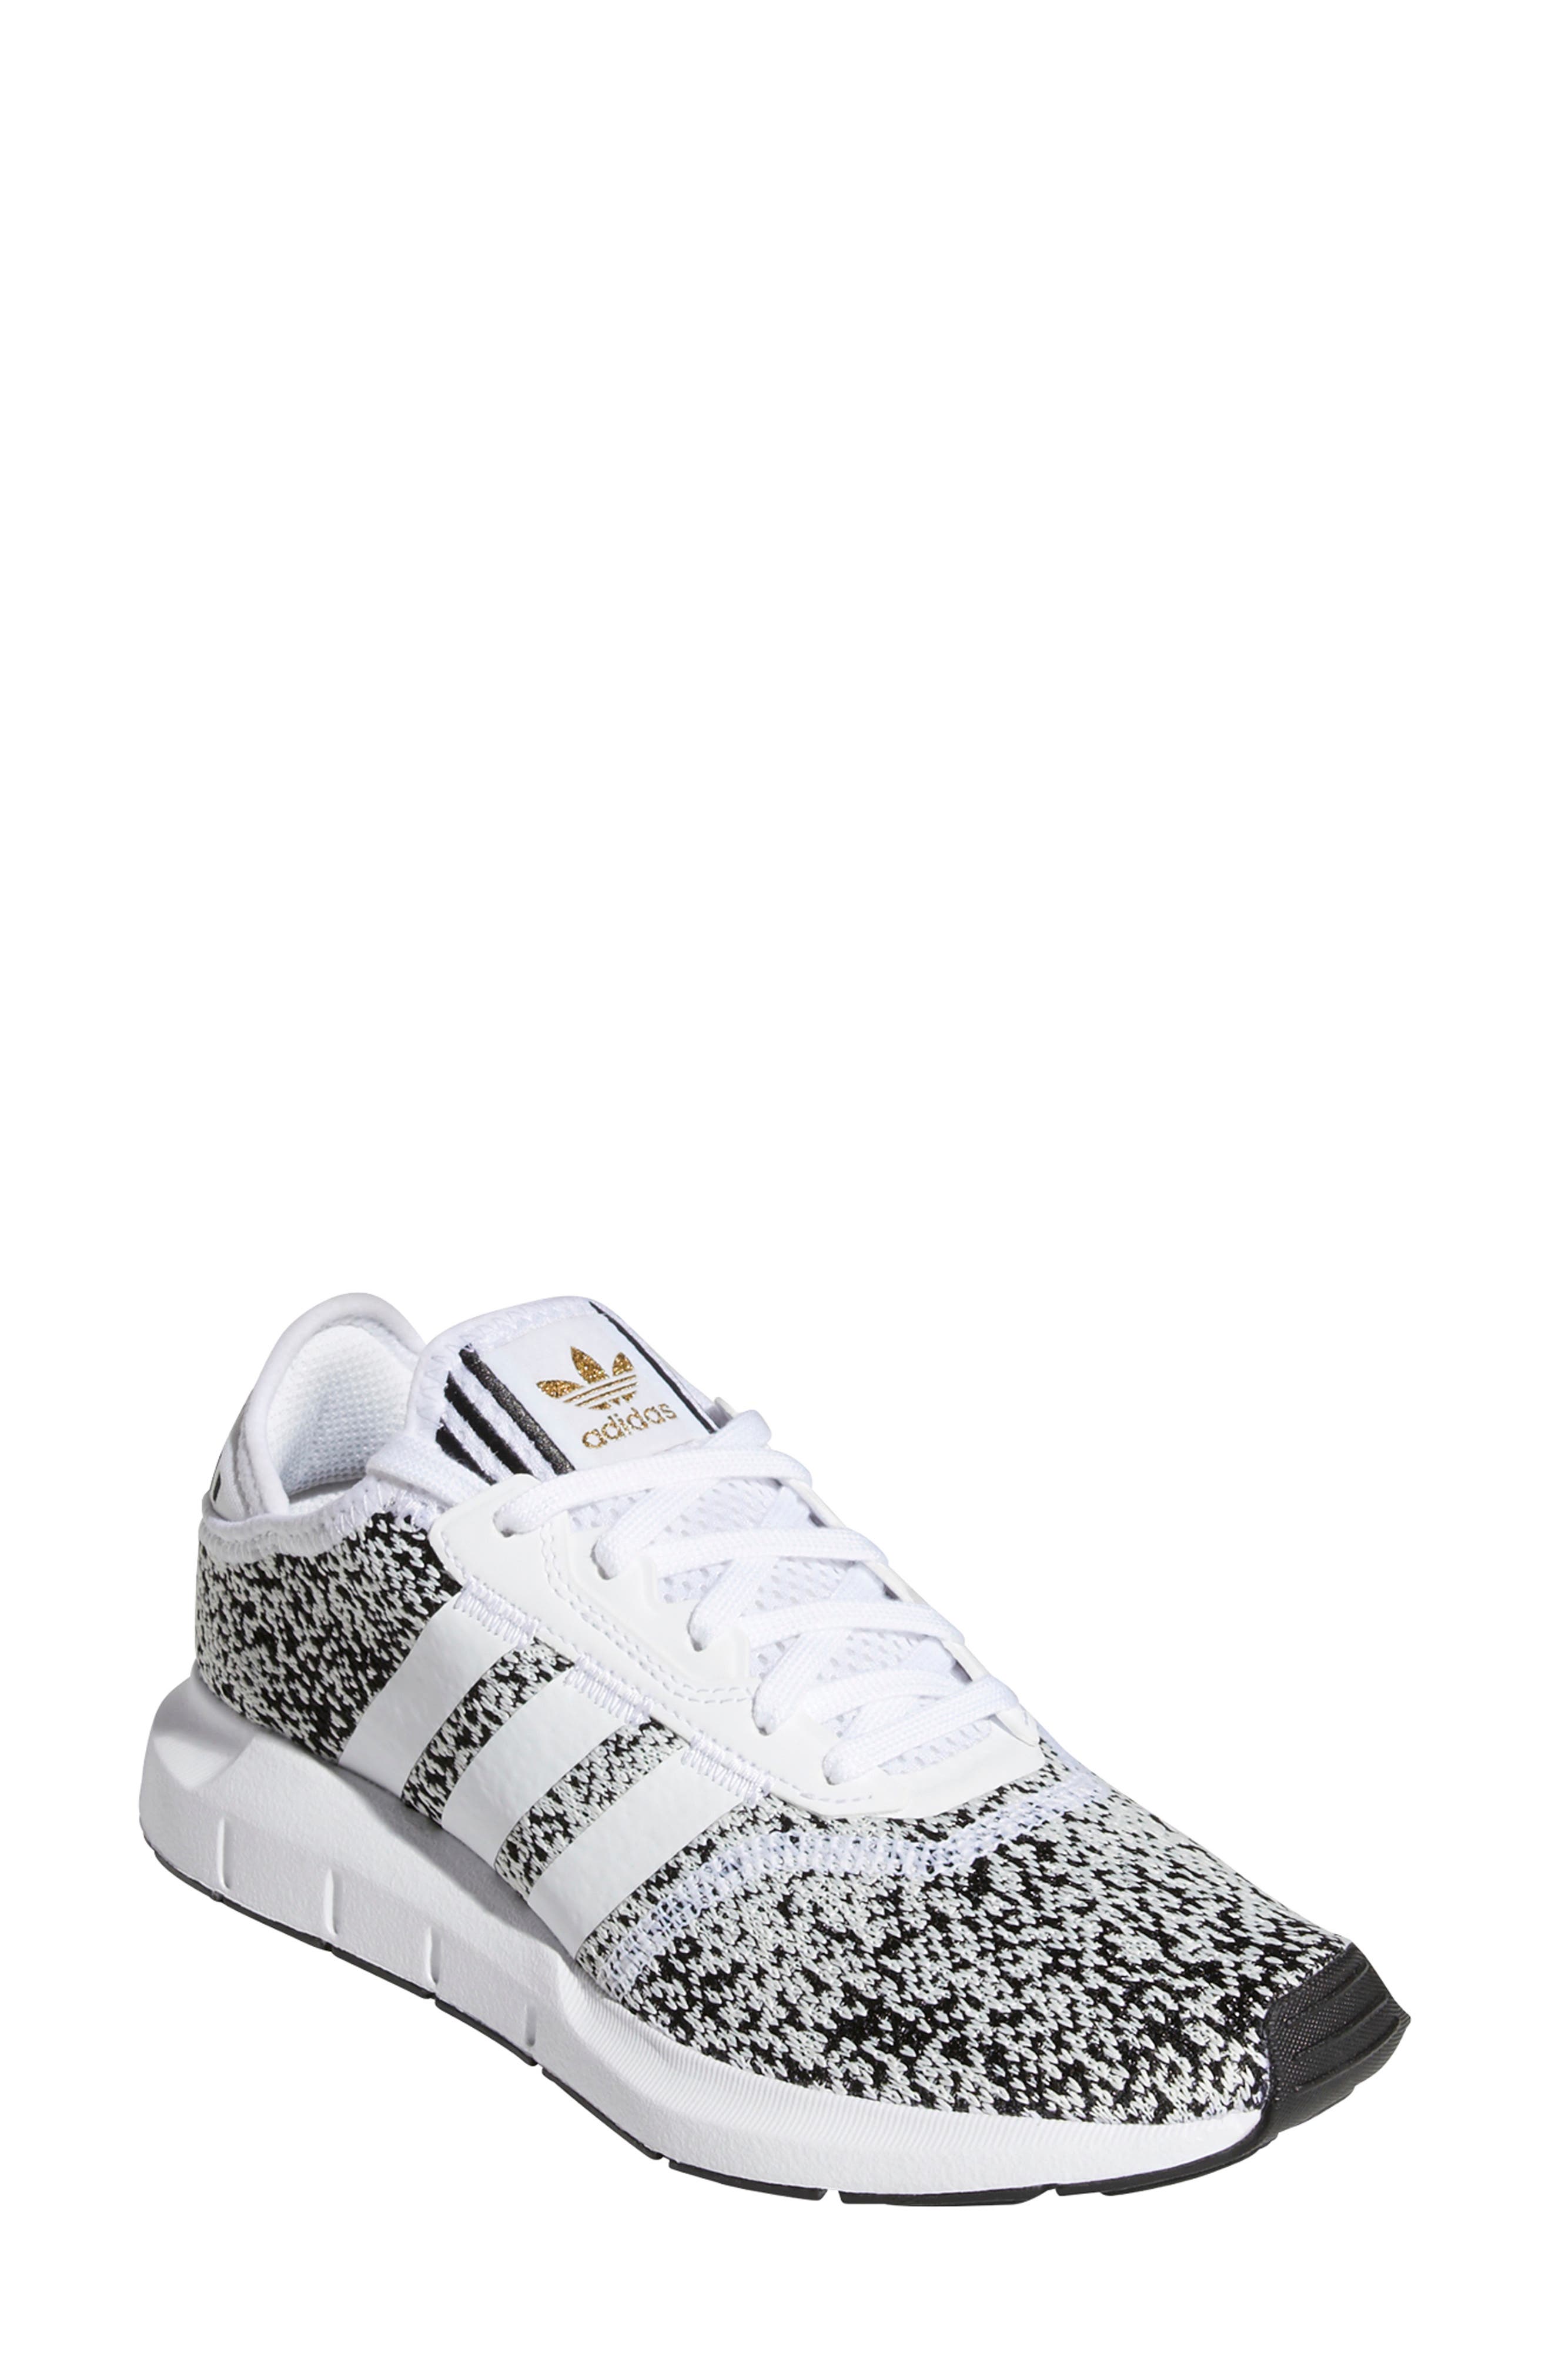 white and grey adidas shoes